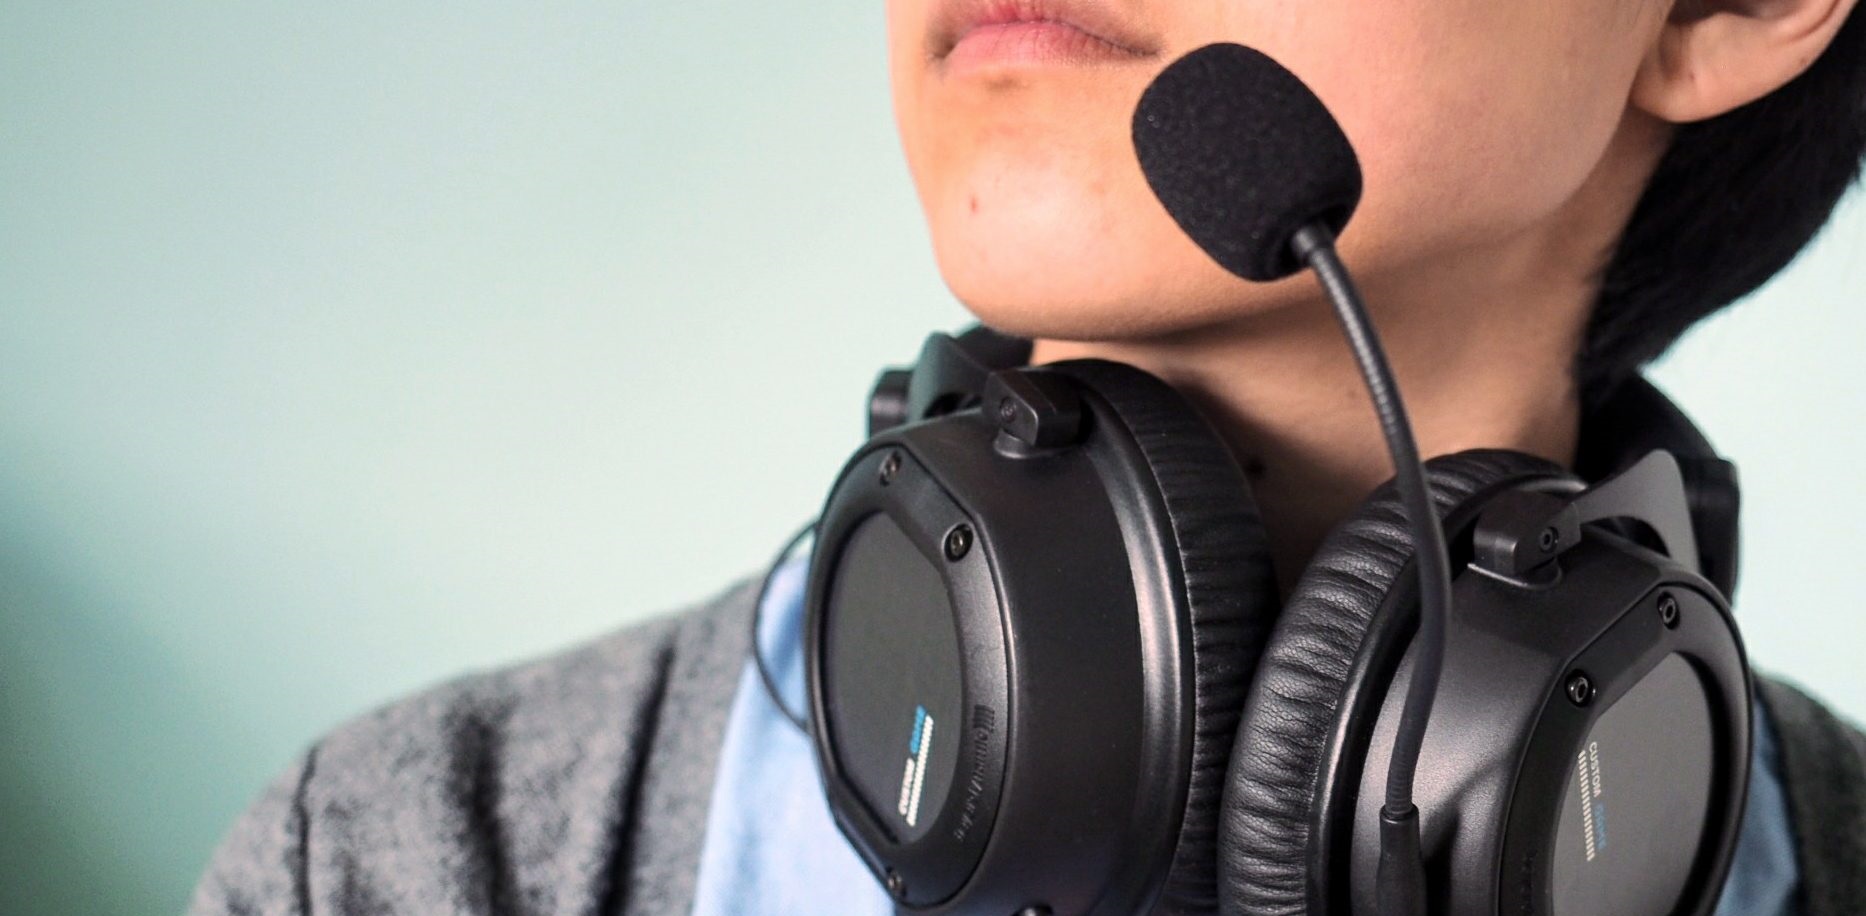 mic-distance-guide-optimal-placement-for-your-headset-mic